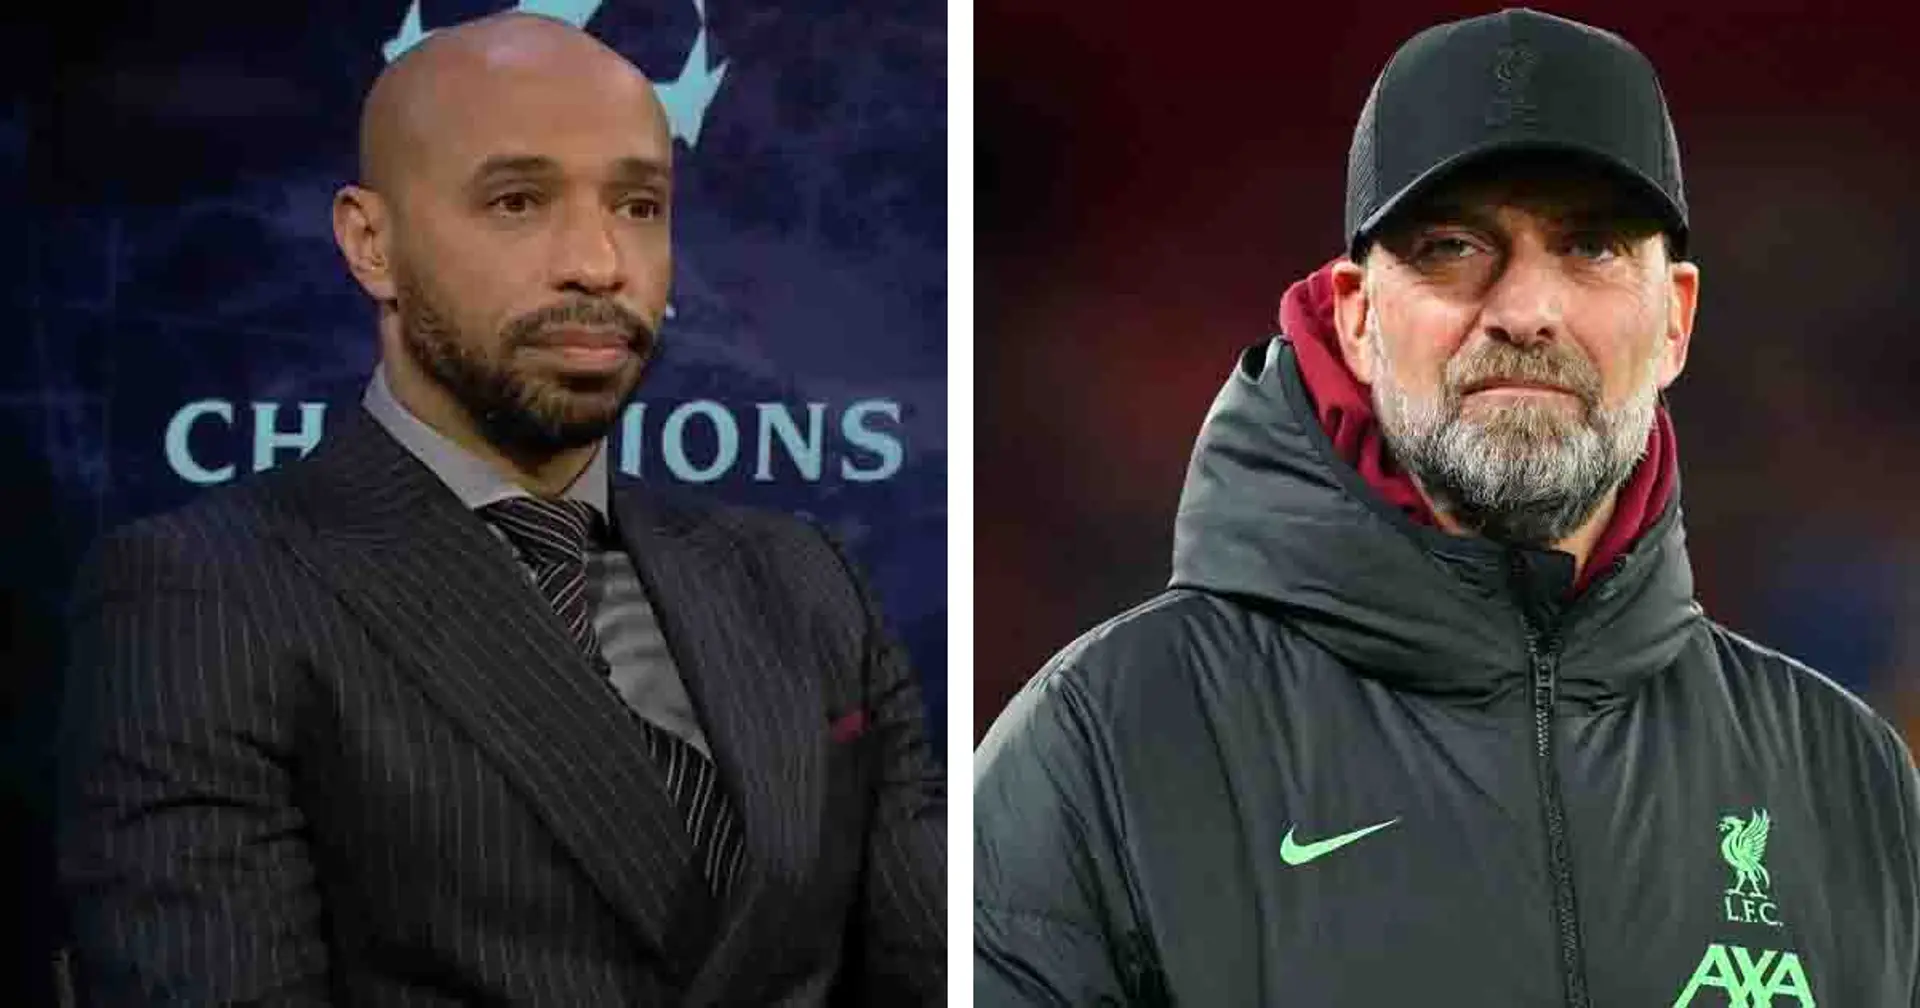 'He was missing his sanity': Theirry Henry explains his theory over Klopp's exit